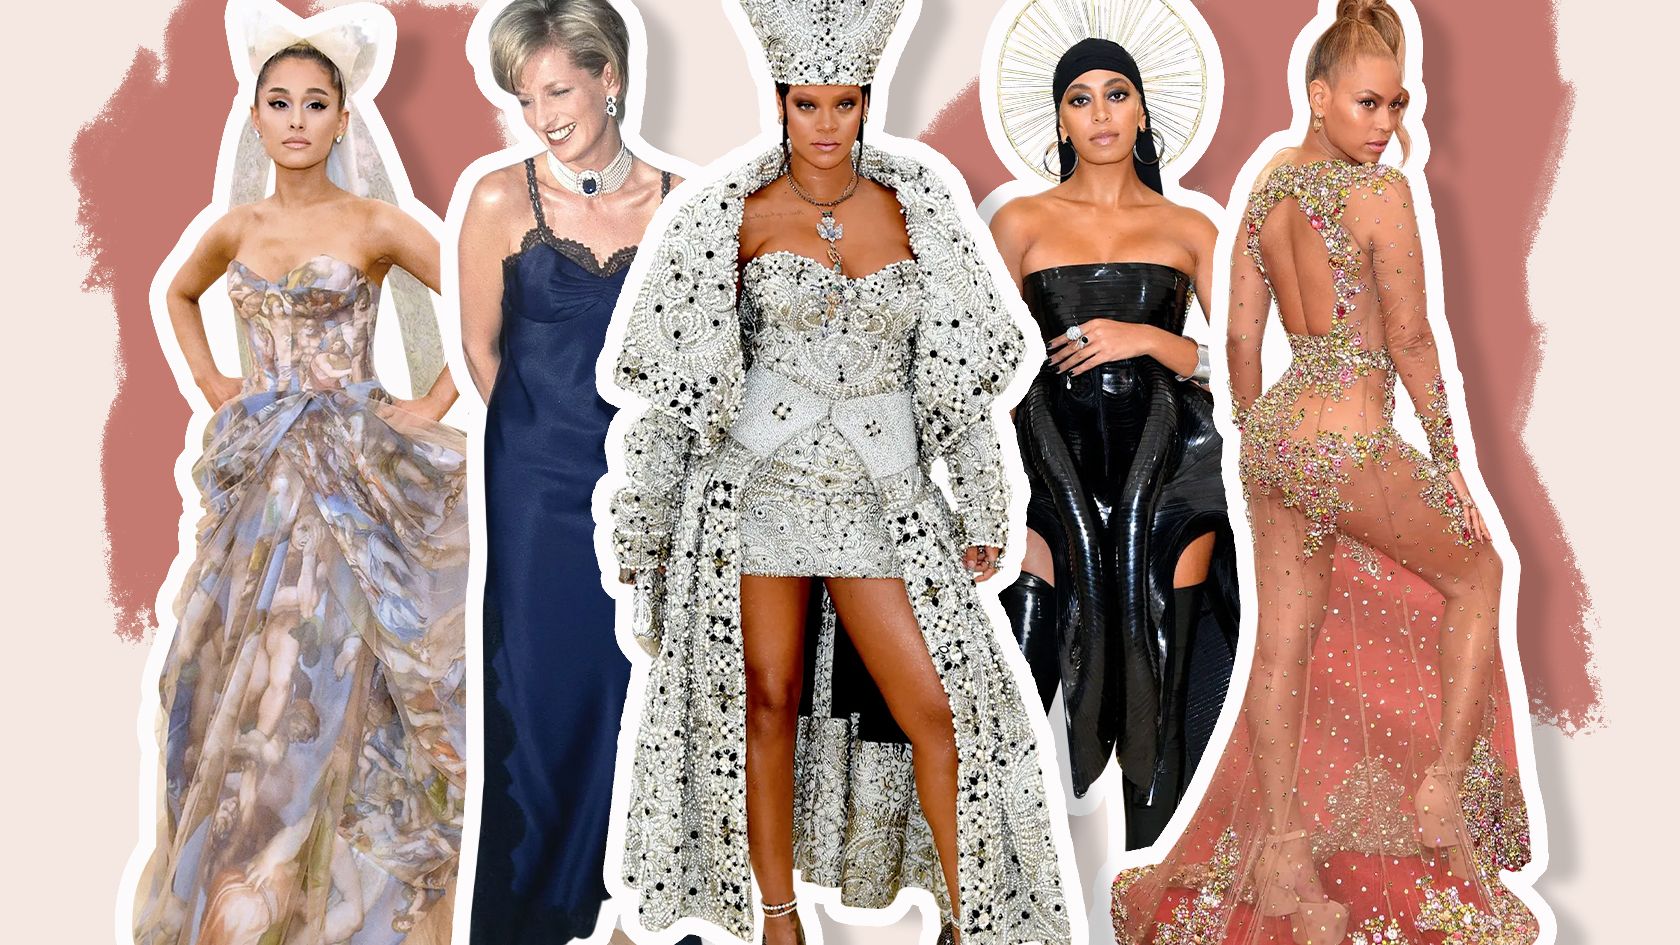 Met Gala 2022: the 25 best red carpet fashion looks of all time